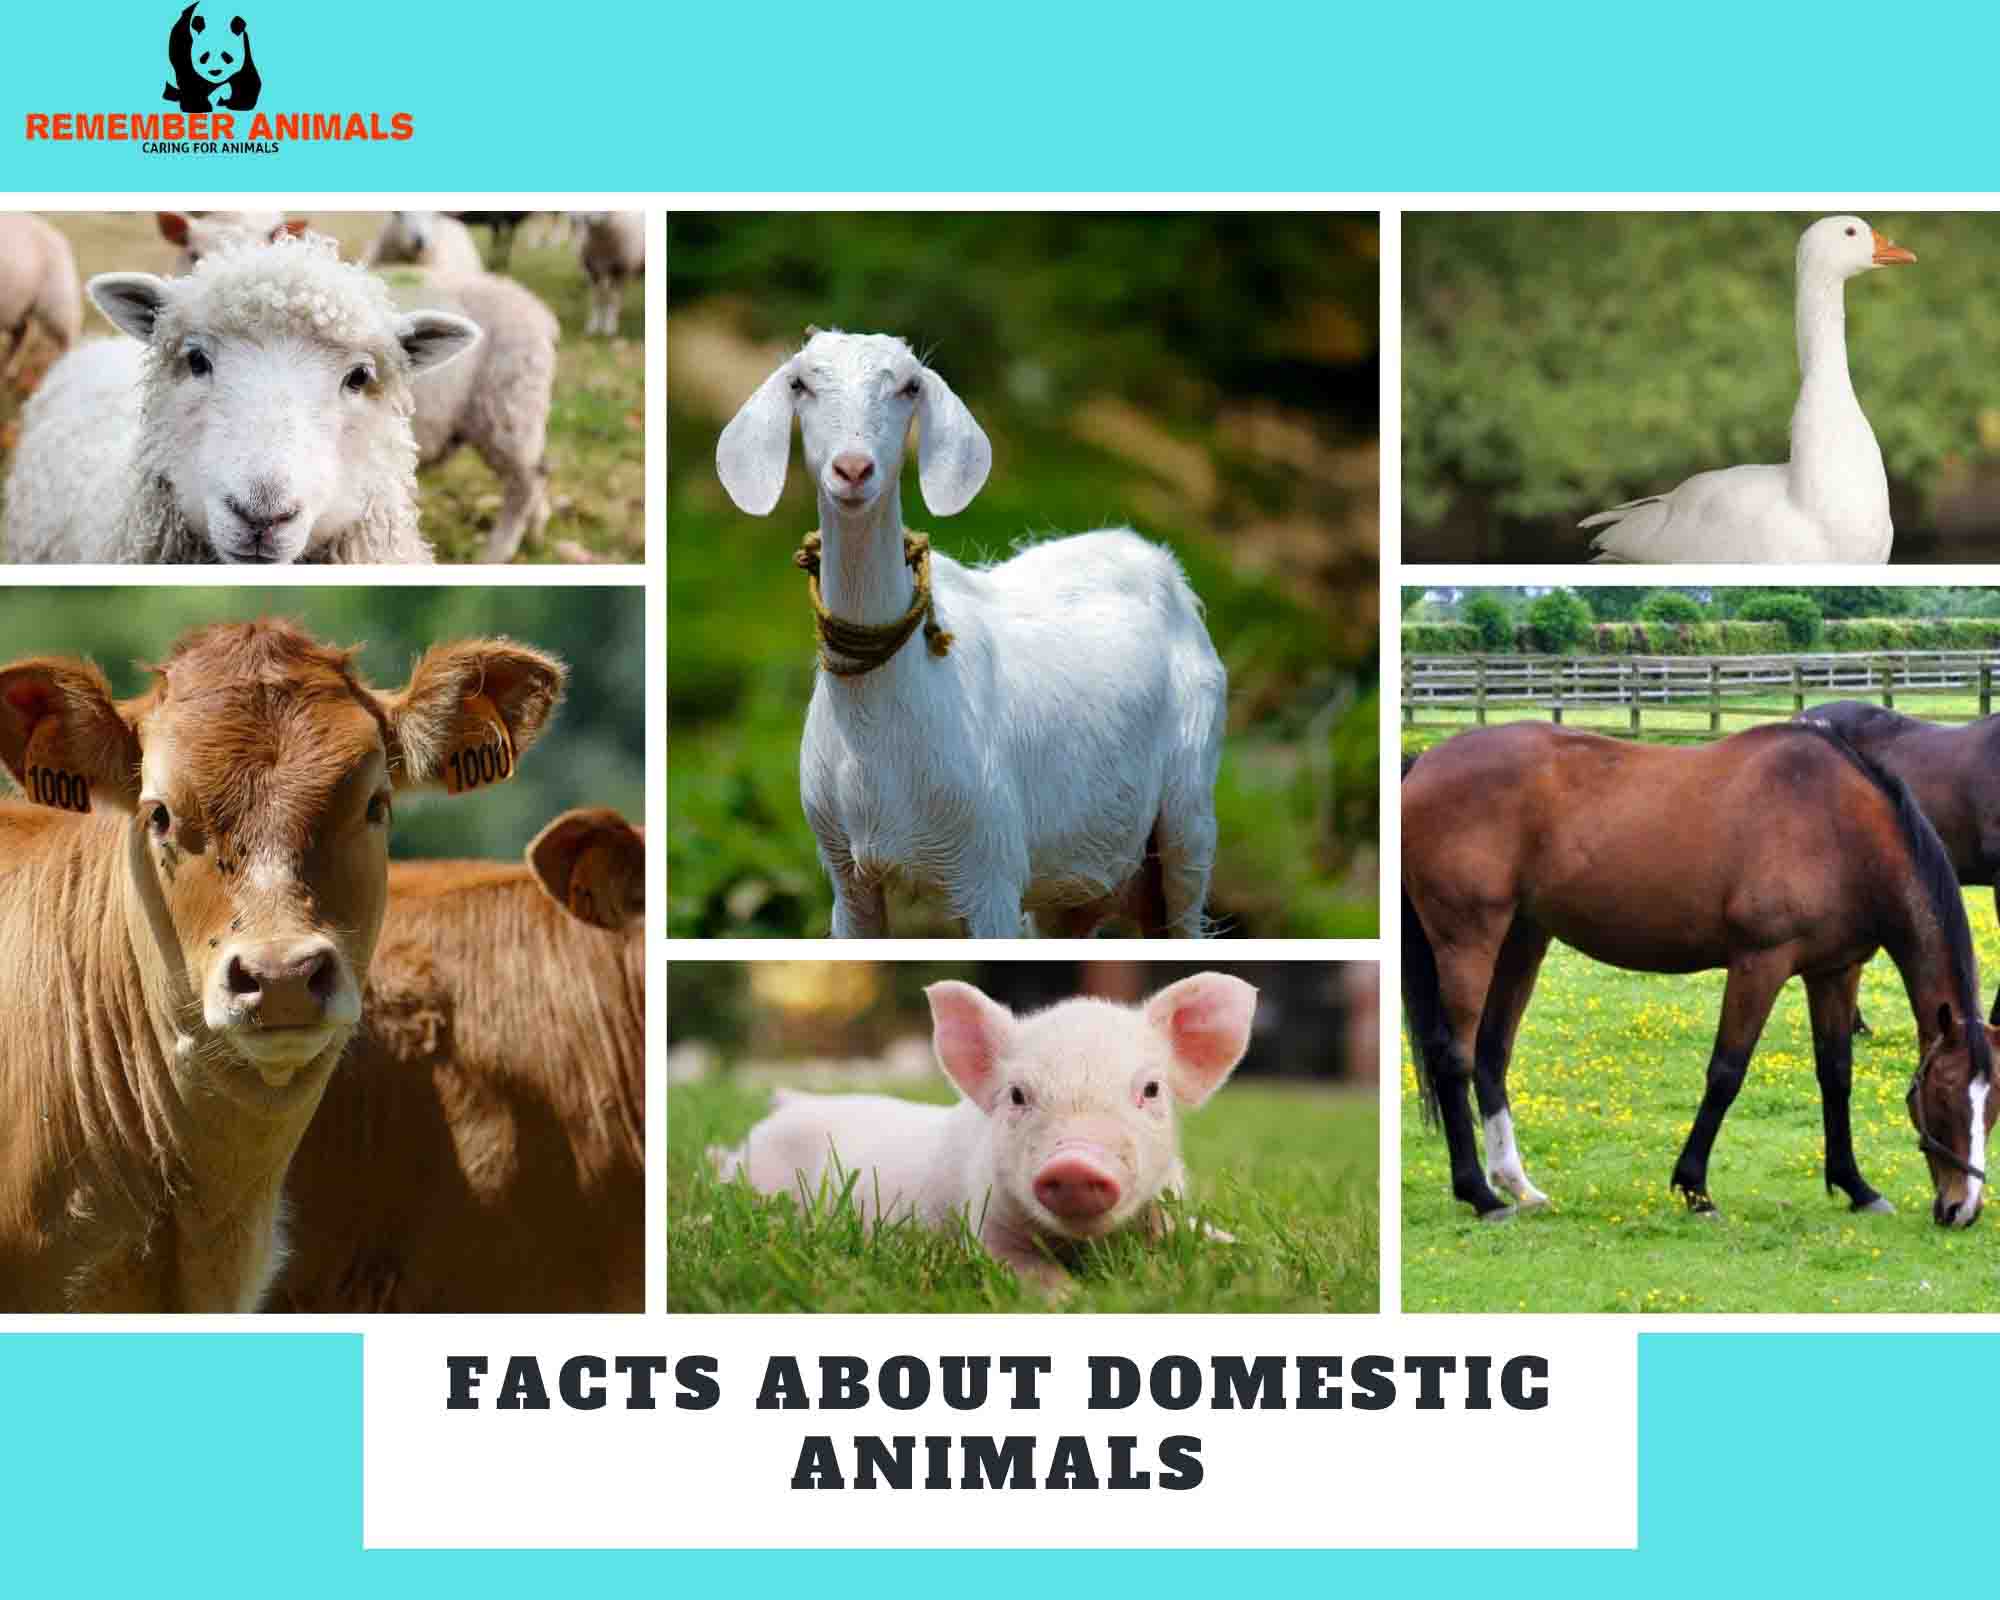 FACTS ABOUT DOMESTIC ANIMALS